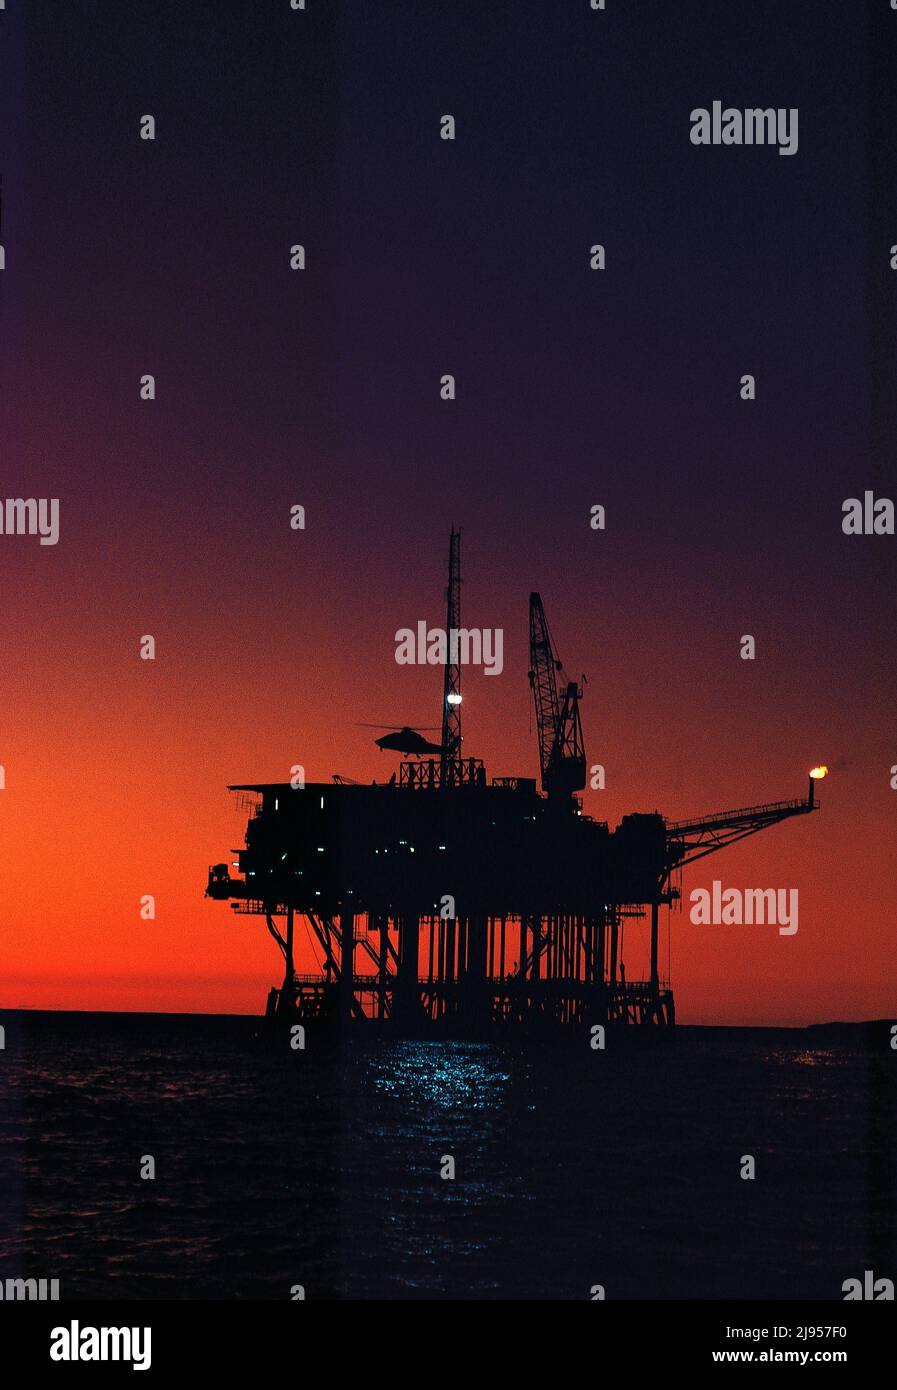 Australia. Industry. Bass strait. Helicopter landing on Southern Cross oil rig at sunset. Stock Photo